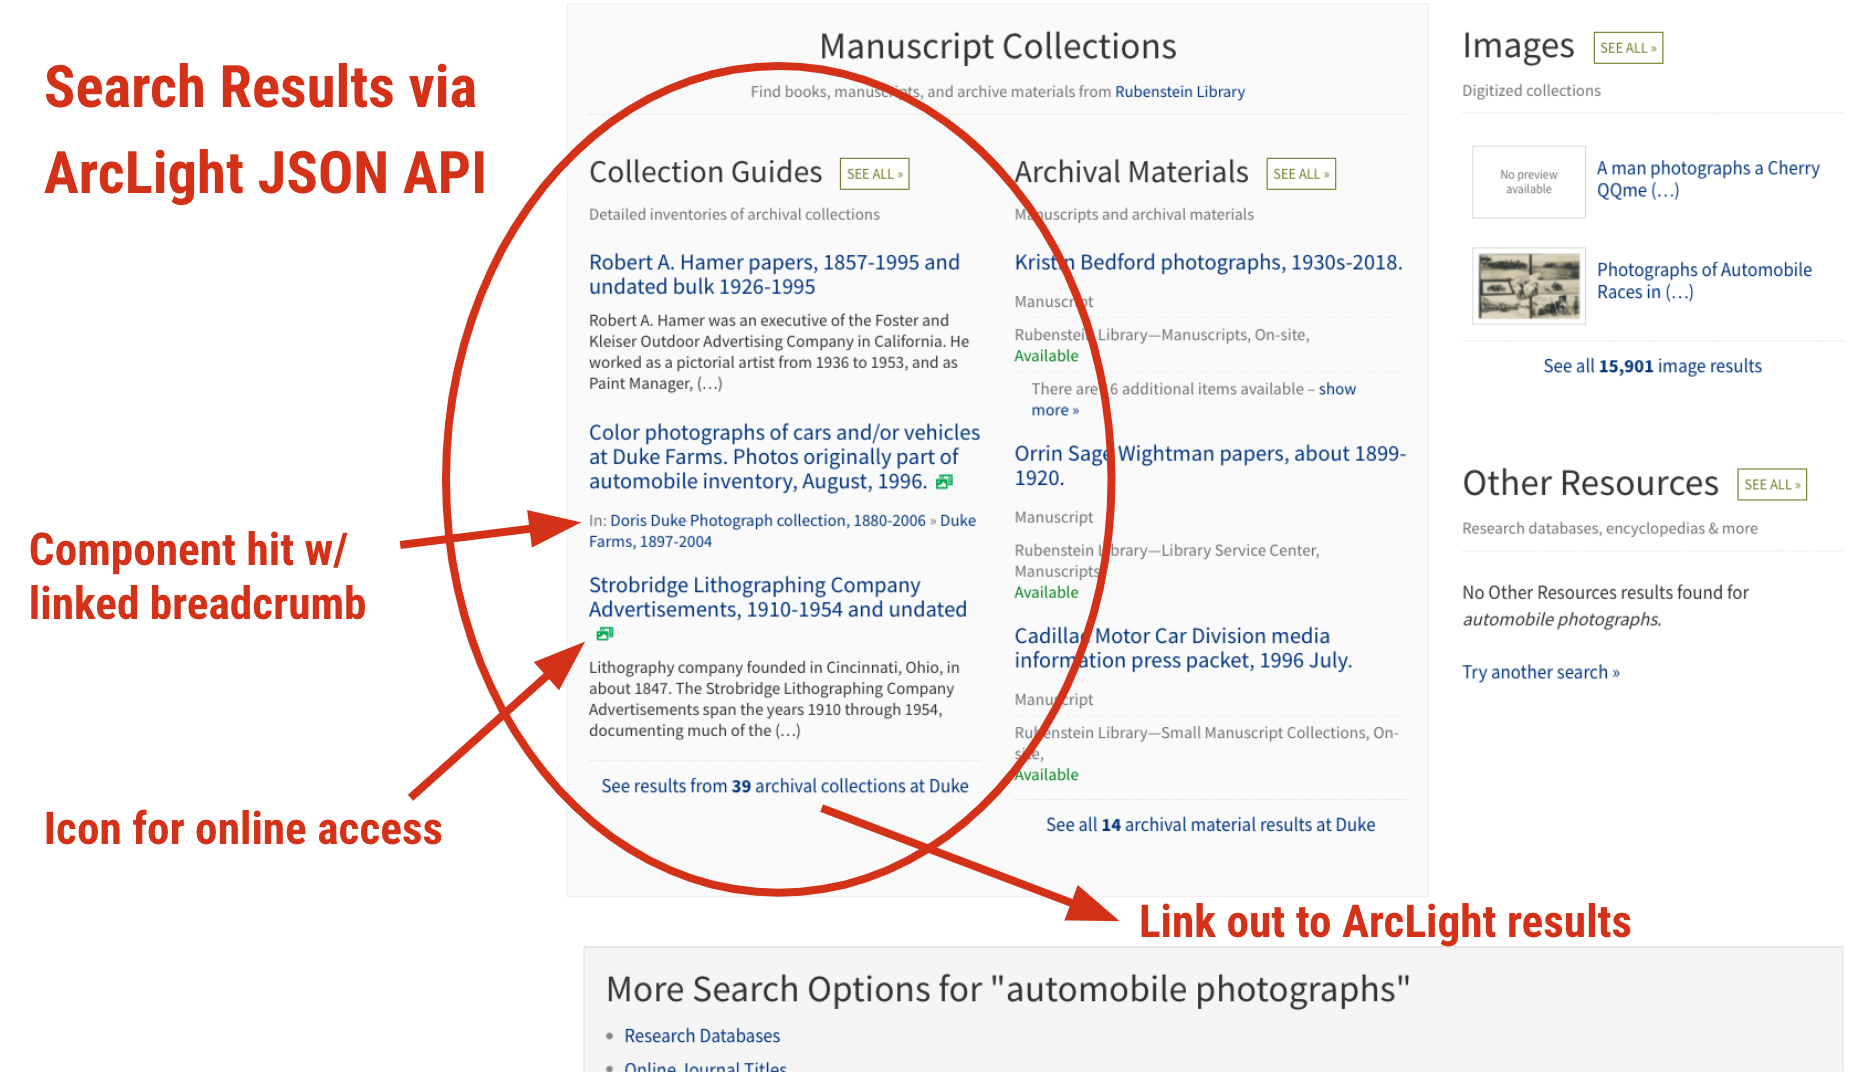 ArcLight search results presented in Bento search UI